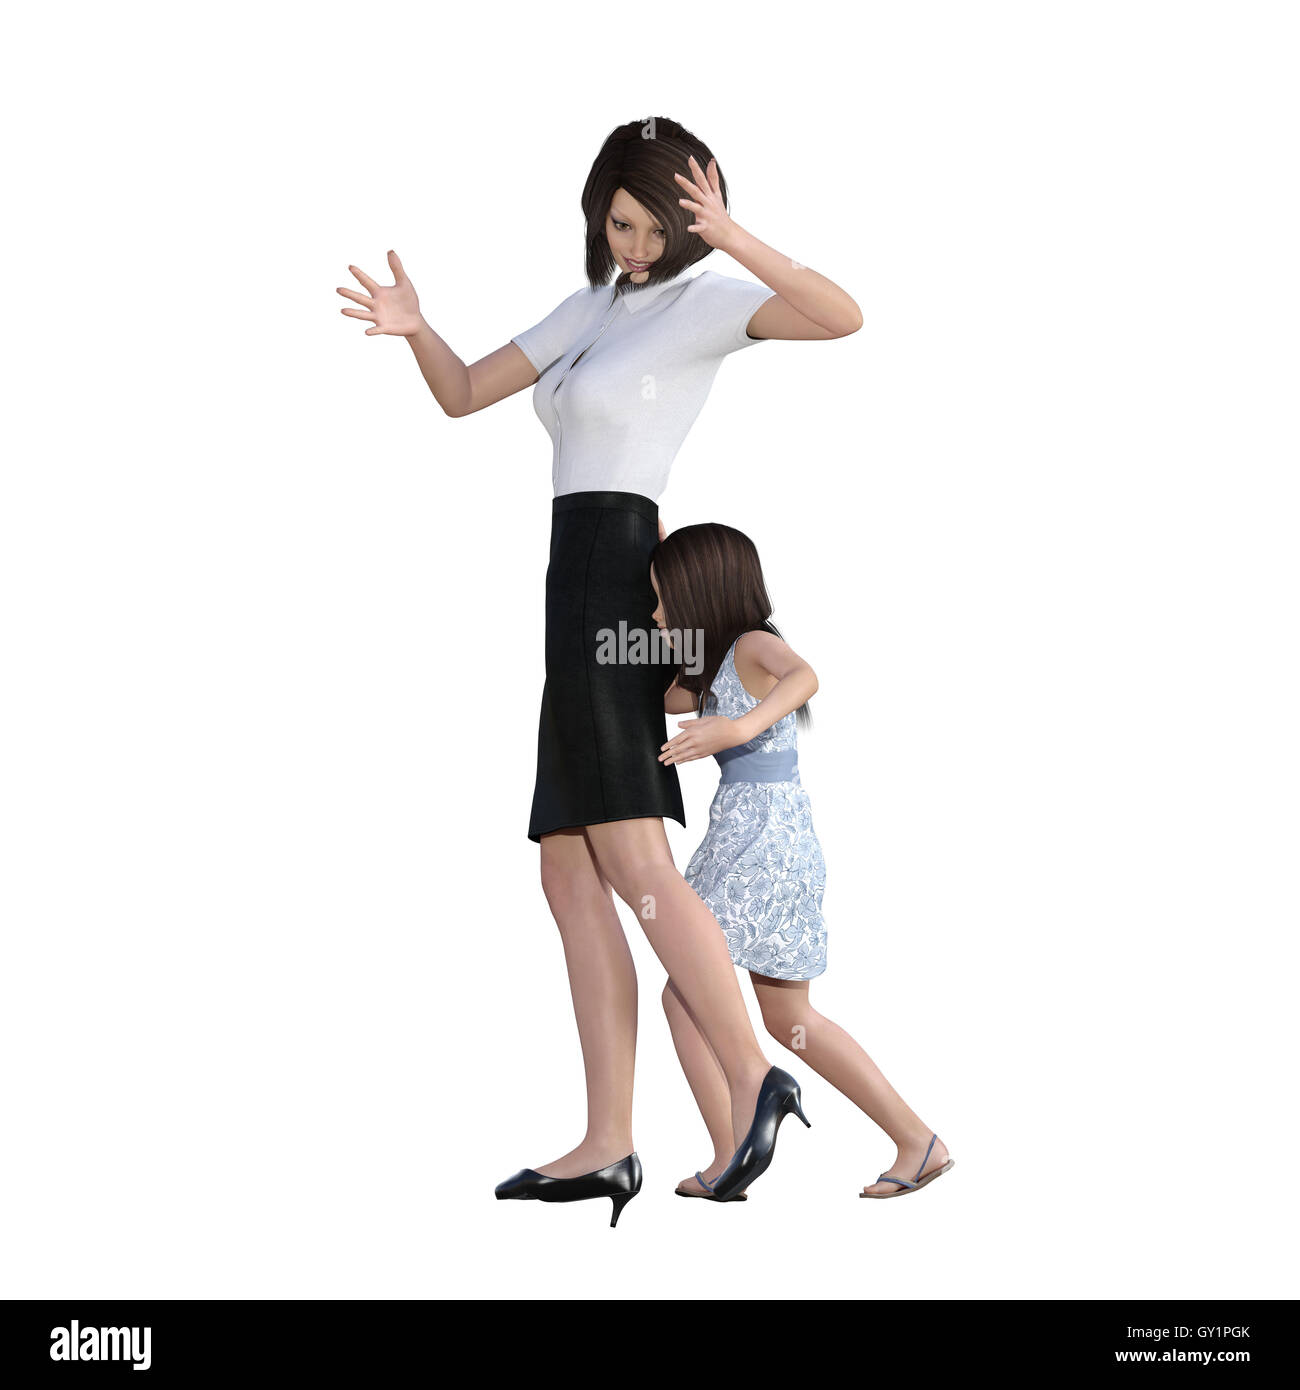 Mother Daughter Interaction of Girl Pushing Mom as an Illustration Concept Stock Photo